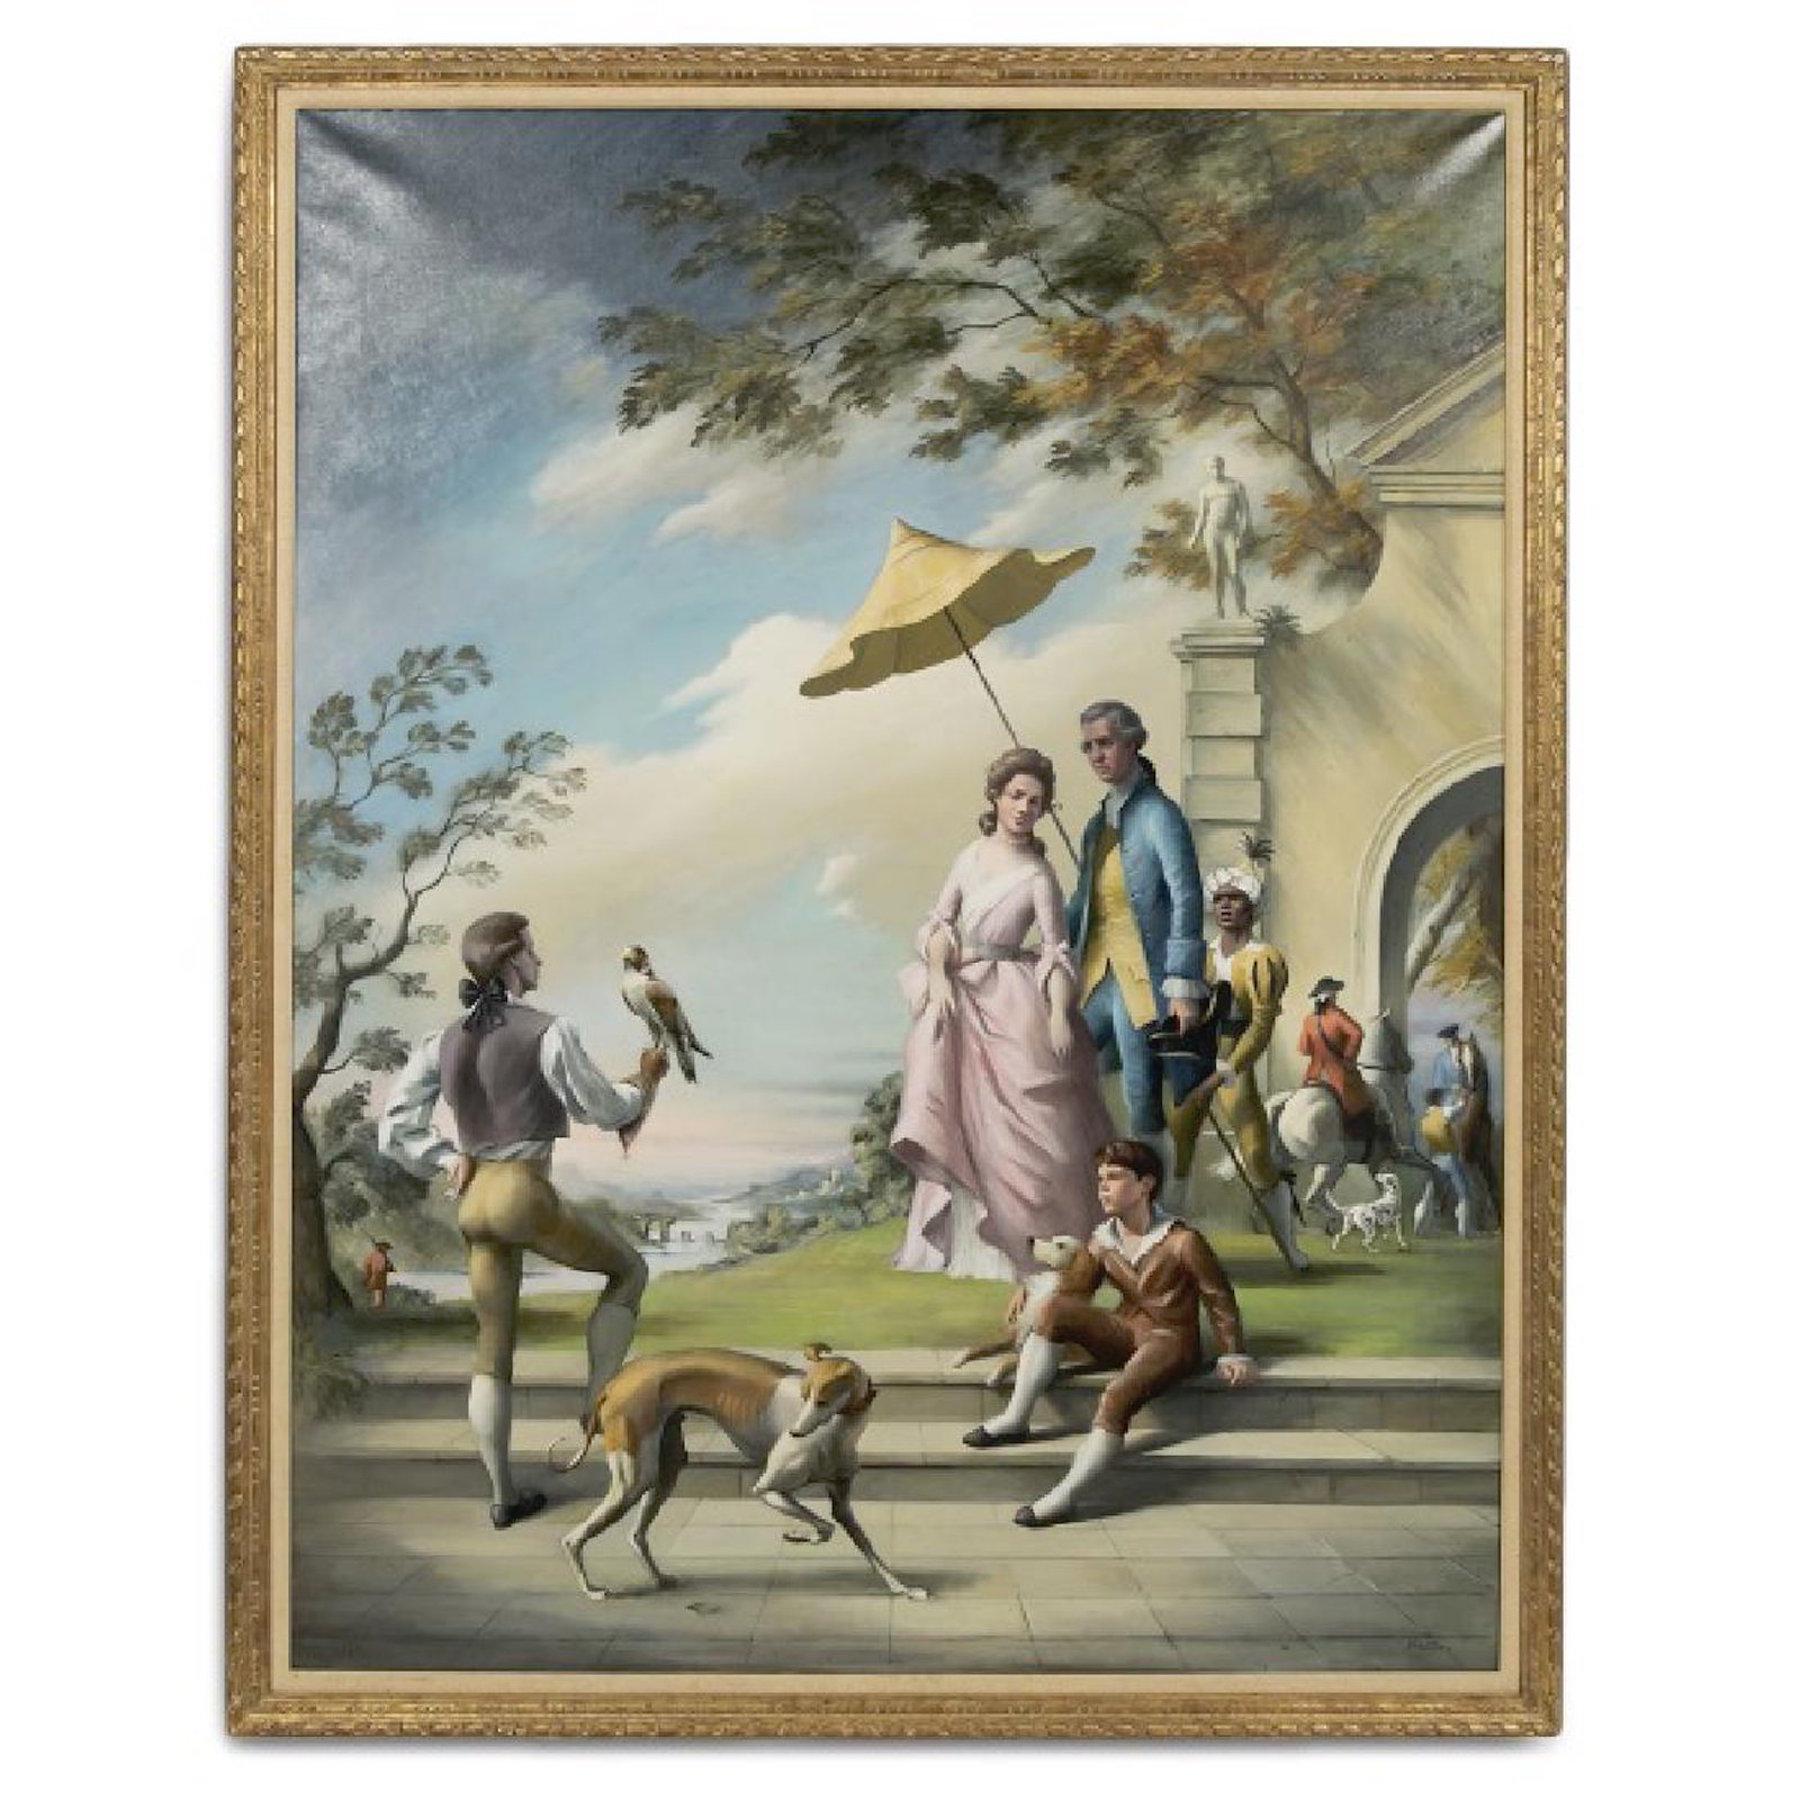 Hollywood Regency Mural in the old master style, detailed and well painted 20th century French garden scene, artist signed lower right 